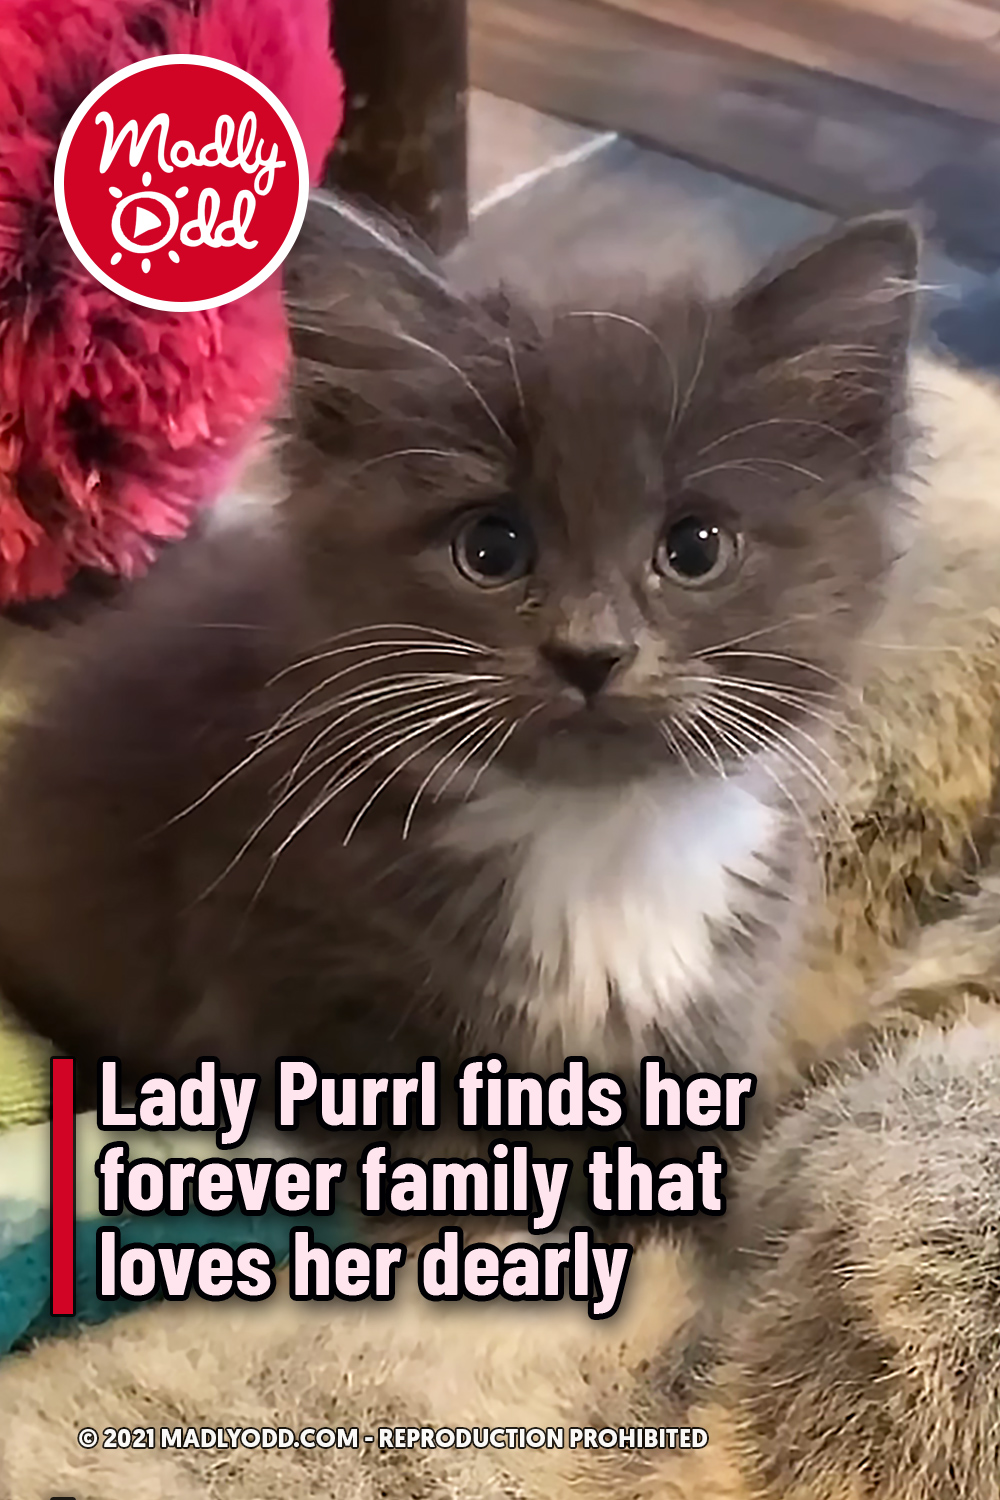 Lady Purrl finds her forever family that loves her dearly